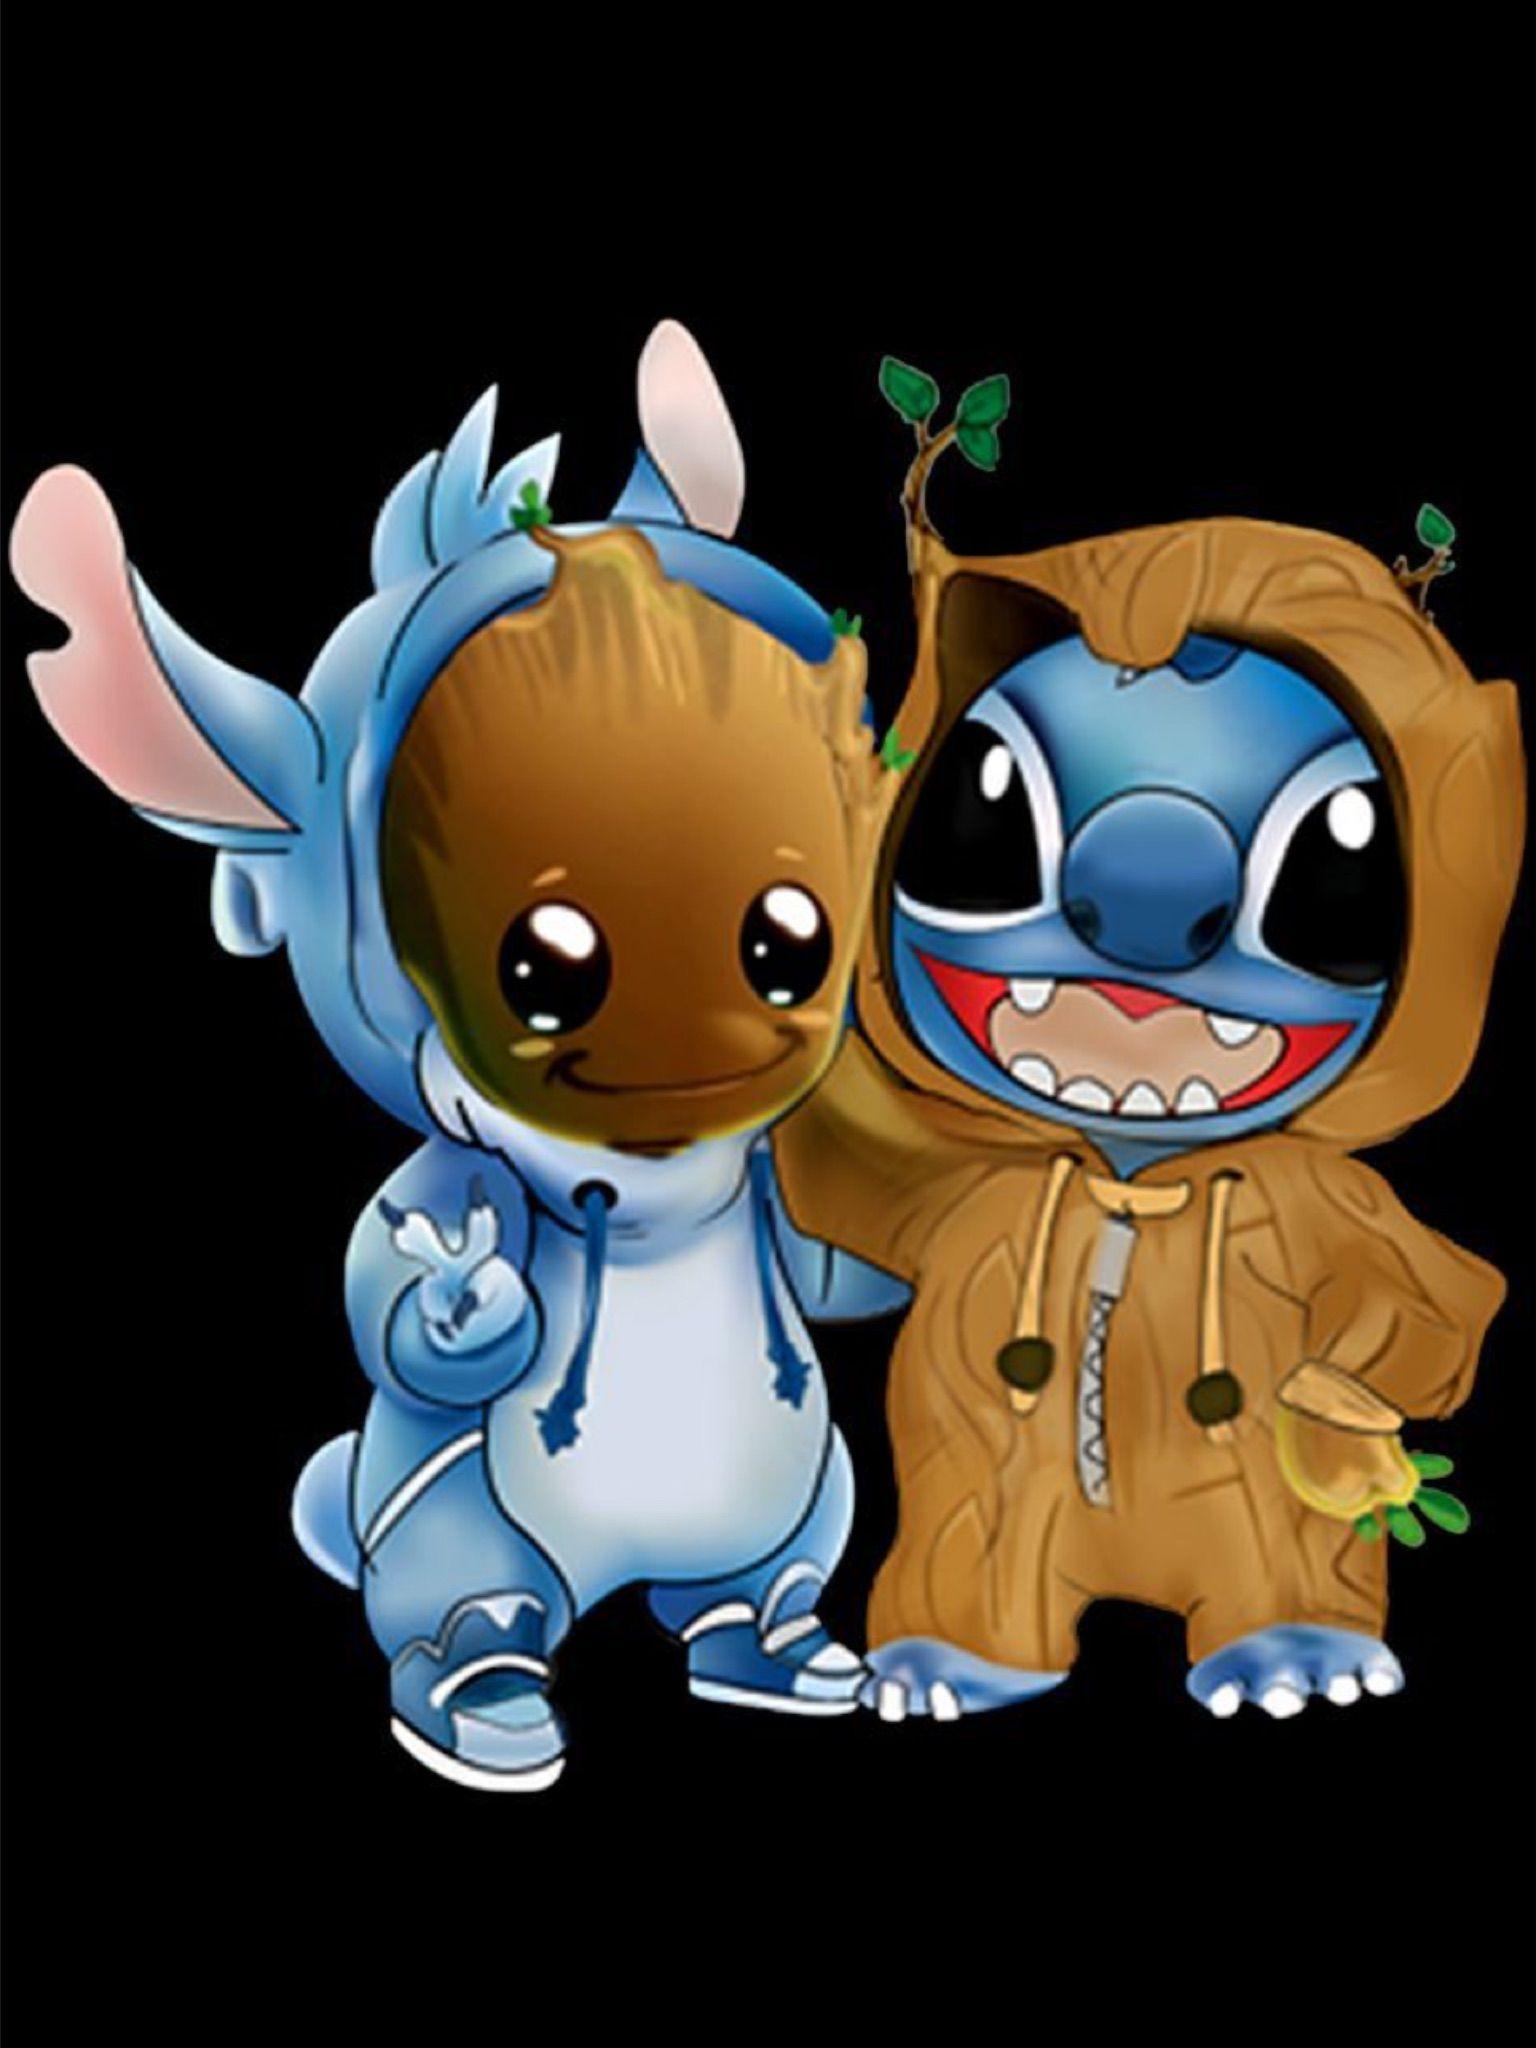  Stitch  And Toothless  Wallpapers  Wallpaper  Cave